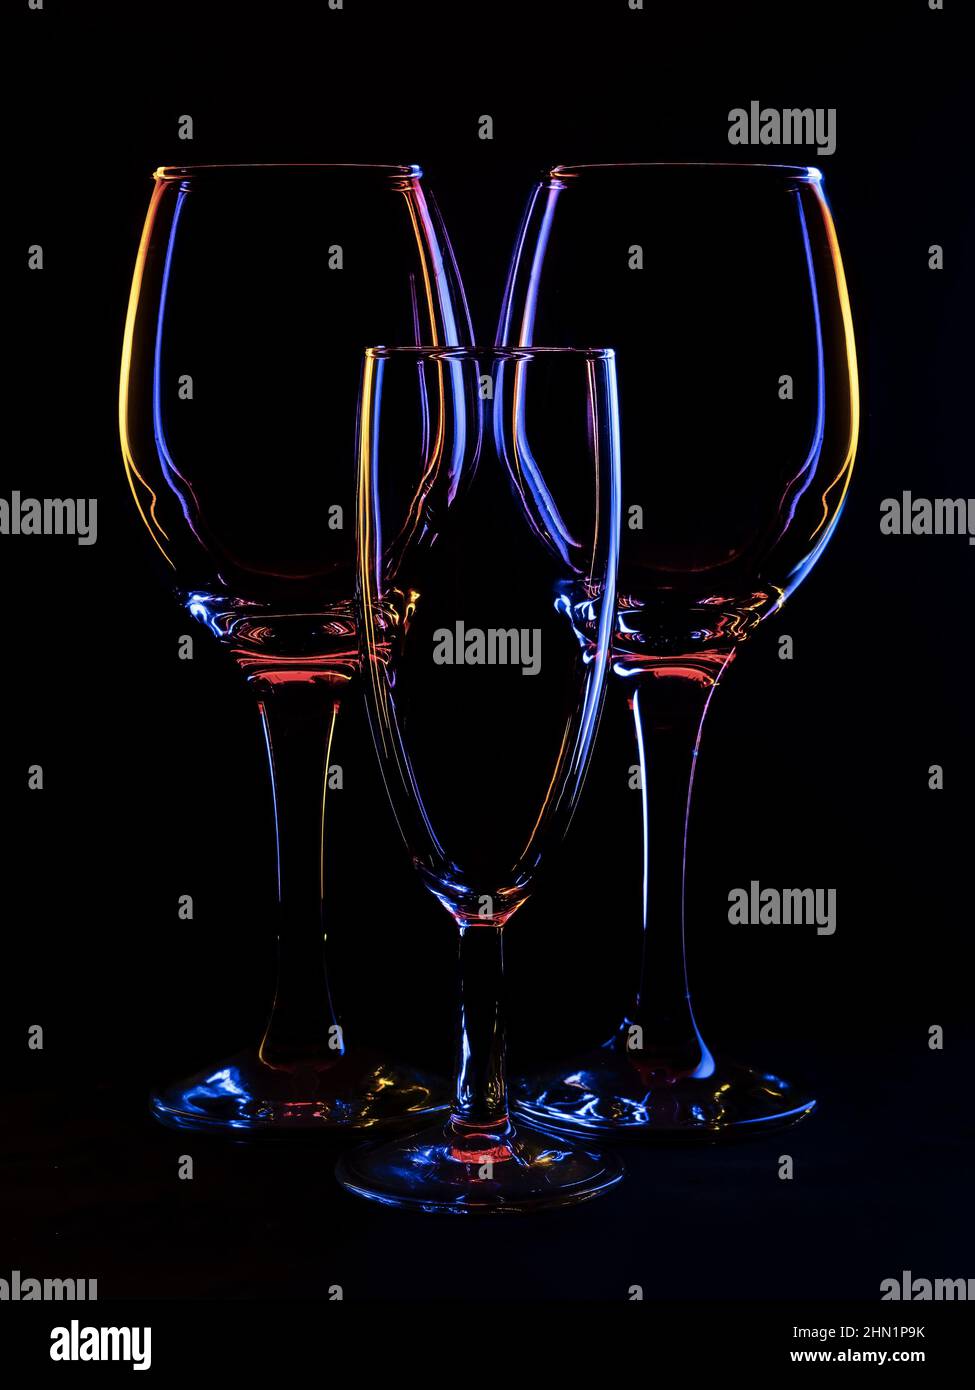 Three wine type glasses, backlit still life with copyspace. Stock Photo